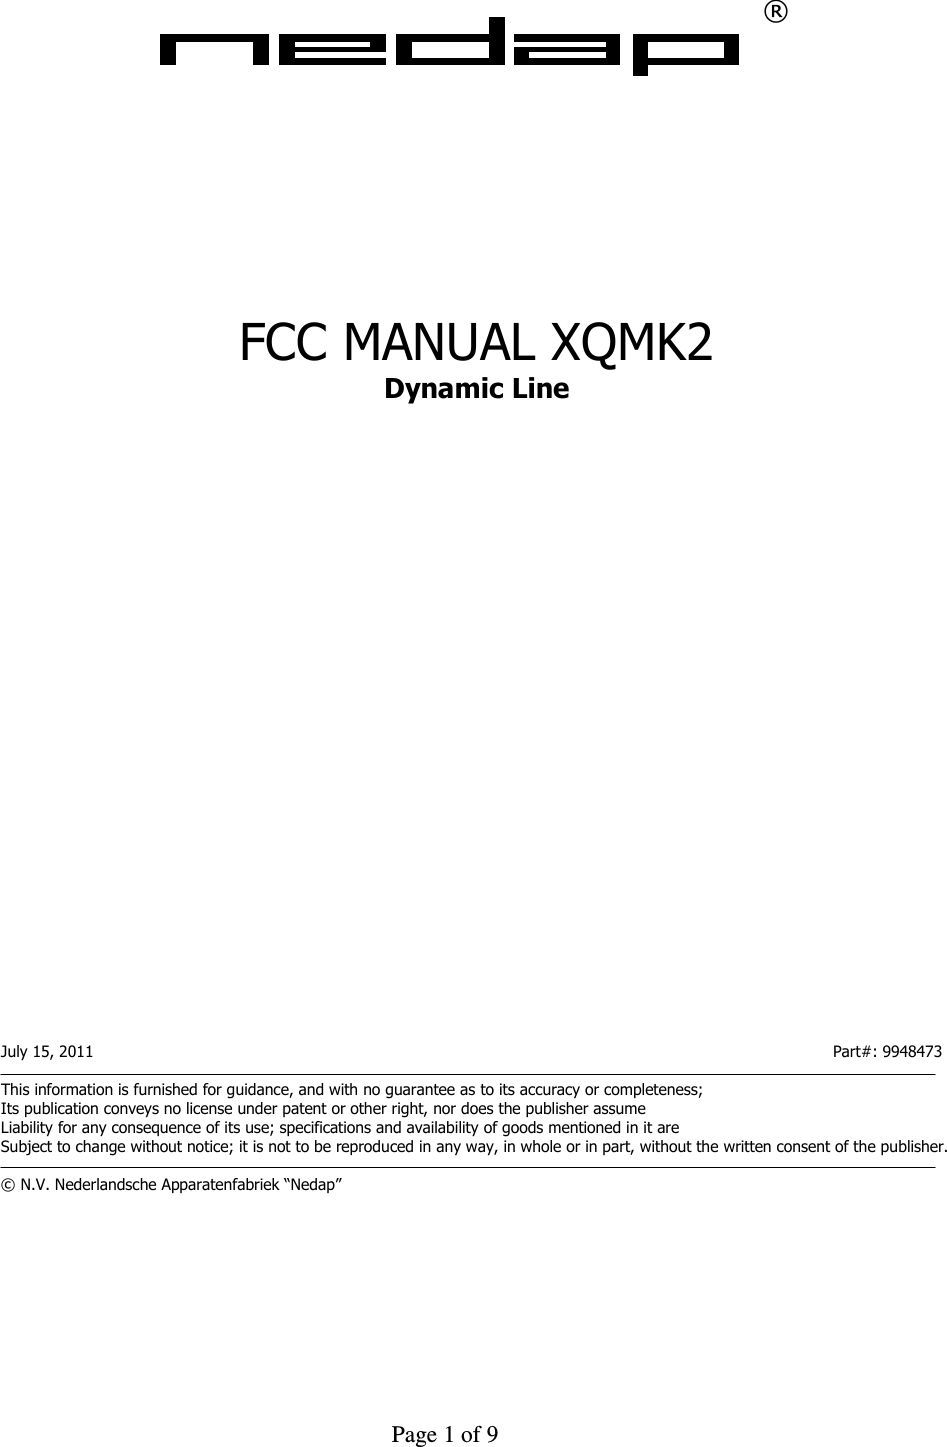     Page 1 of 9    ®             FCC MANUAL XQMK2 Dynamic Line                            July 15, 2011                      Part#: 9948473  This information is furnished for guidance, and with no guarantee as to its accuracy or completeness; Its publication conveys no license under patent or other right, nor does the publisher assume Liability for any consequence of its use; specifications and availability of goods mentioned in it are Subject to change without notice; it is not to be reproduced in any way, in whole or in part, without the written consent of the publisher.  © N.V. Nederlandsche Apparatenfabriek “Nedap”